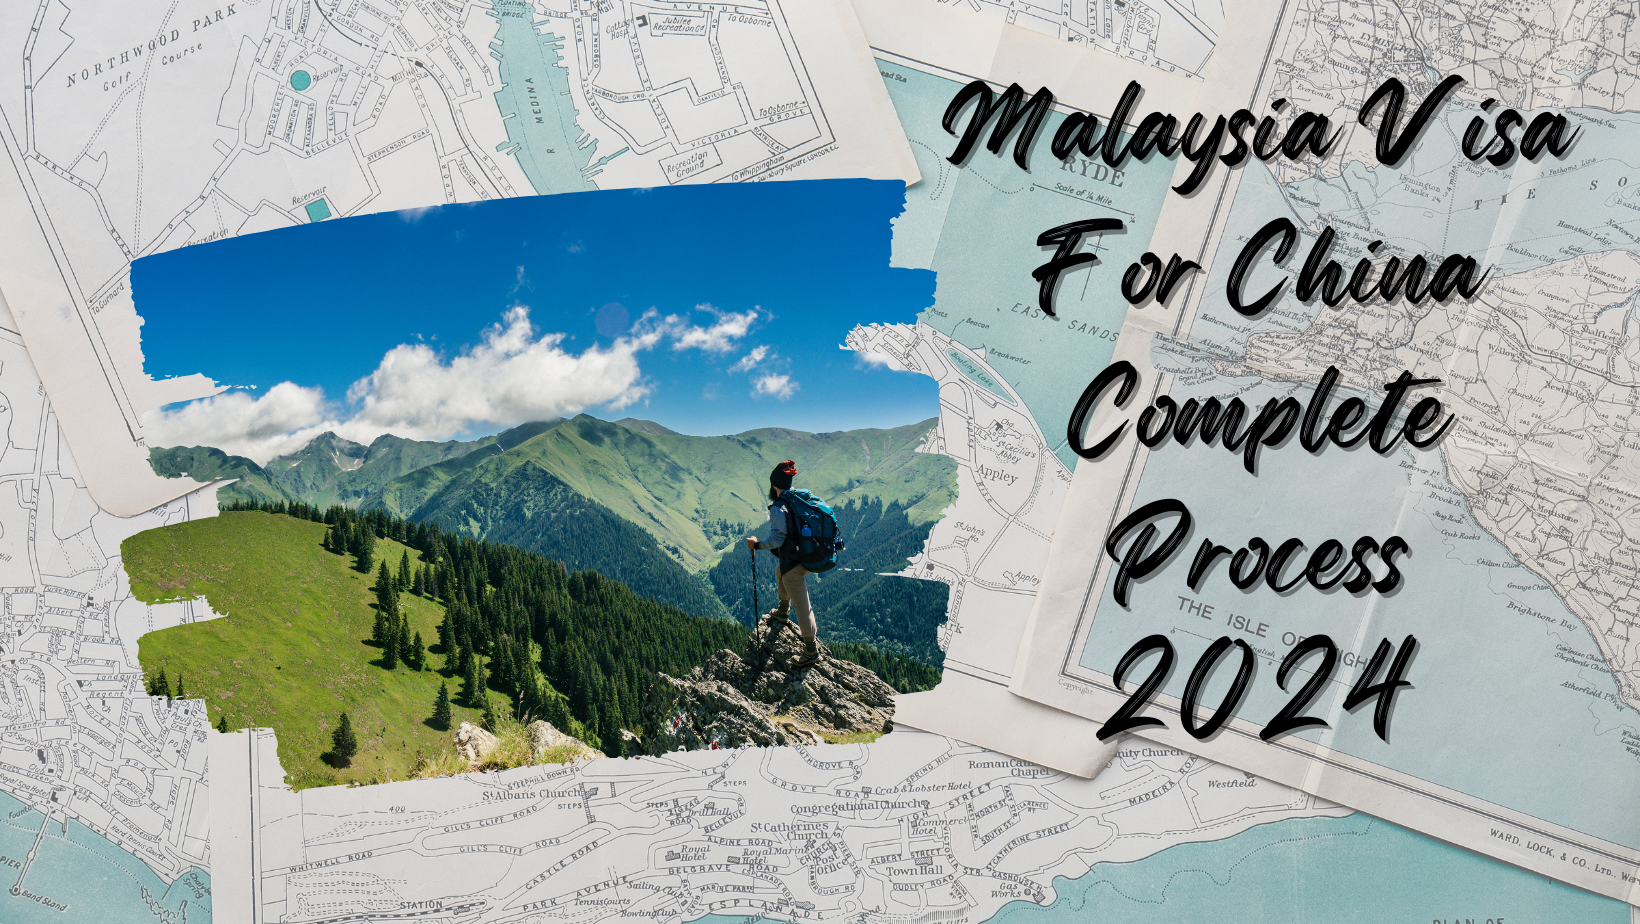 Malaysia Visa For China Complete Process 2024